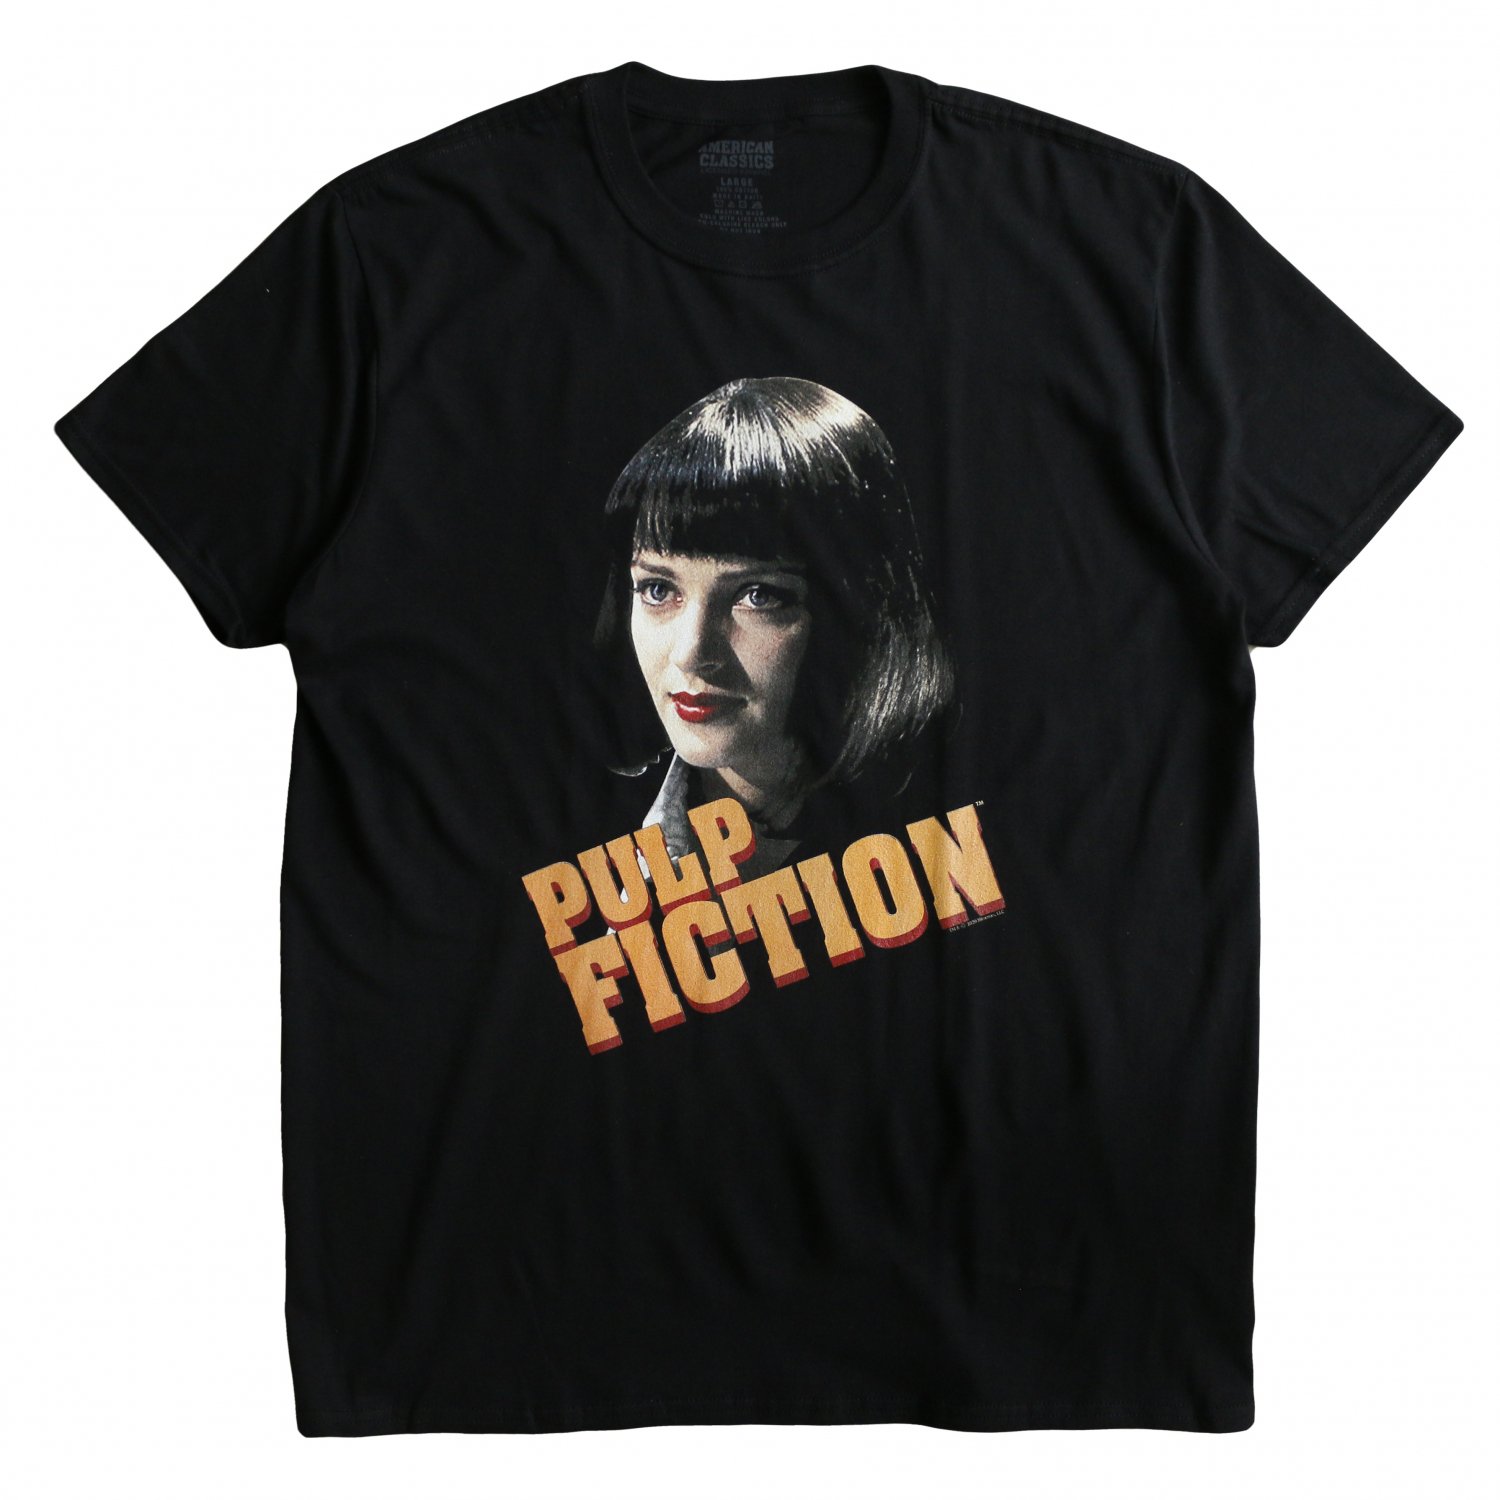 <img class='new_mark_img1' src='https://img.shop-pro.jp/img/new/icons8.gif' style='border:none;display:inline;margin:0px;padding:0px;width:auto;' />Movie Tee / S/S TEE PULP FICTION 